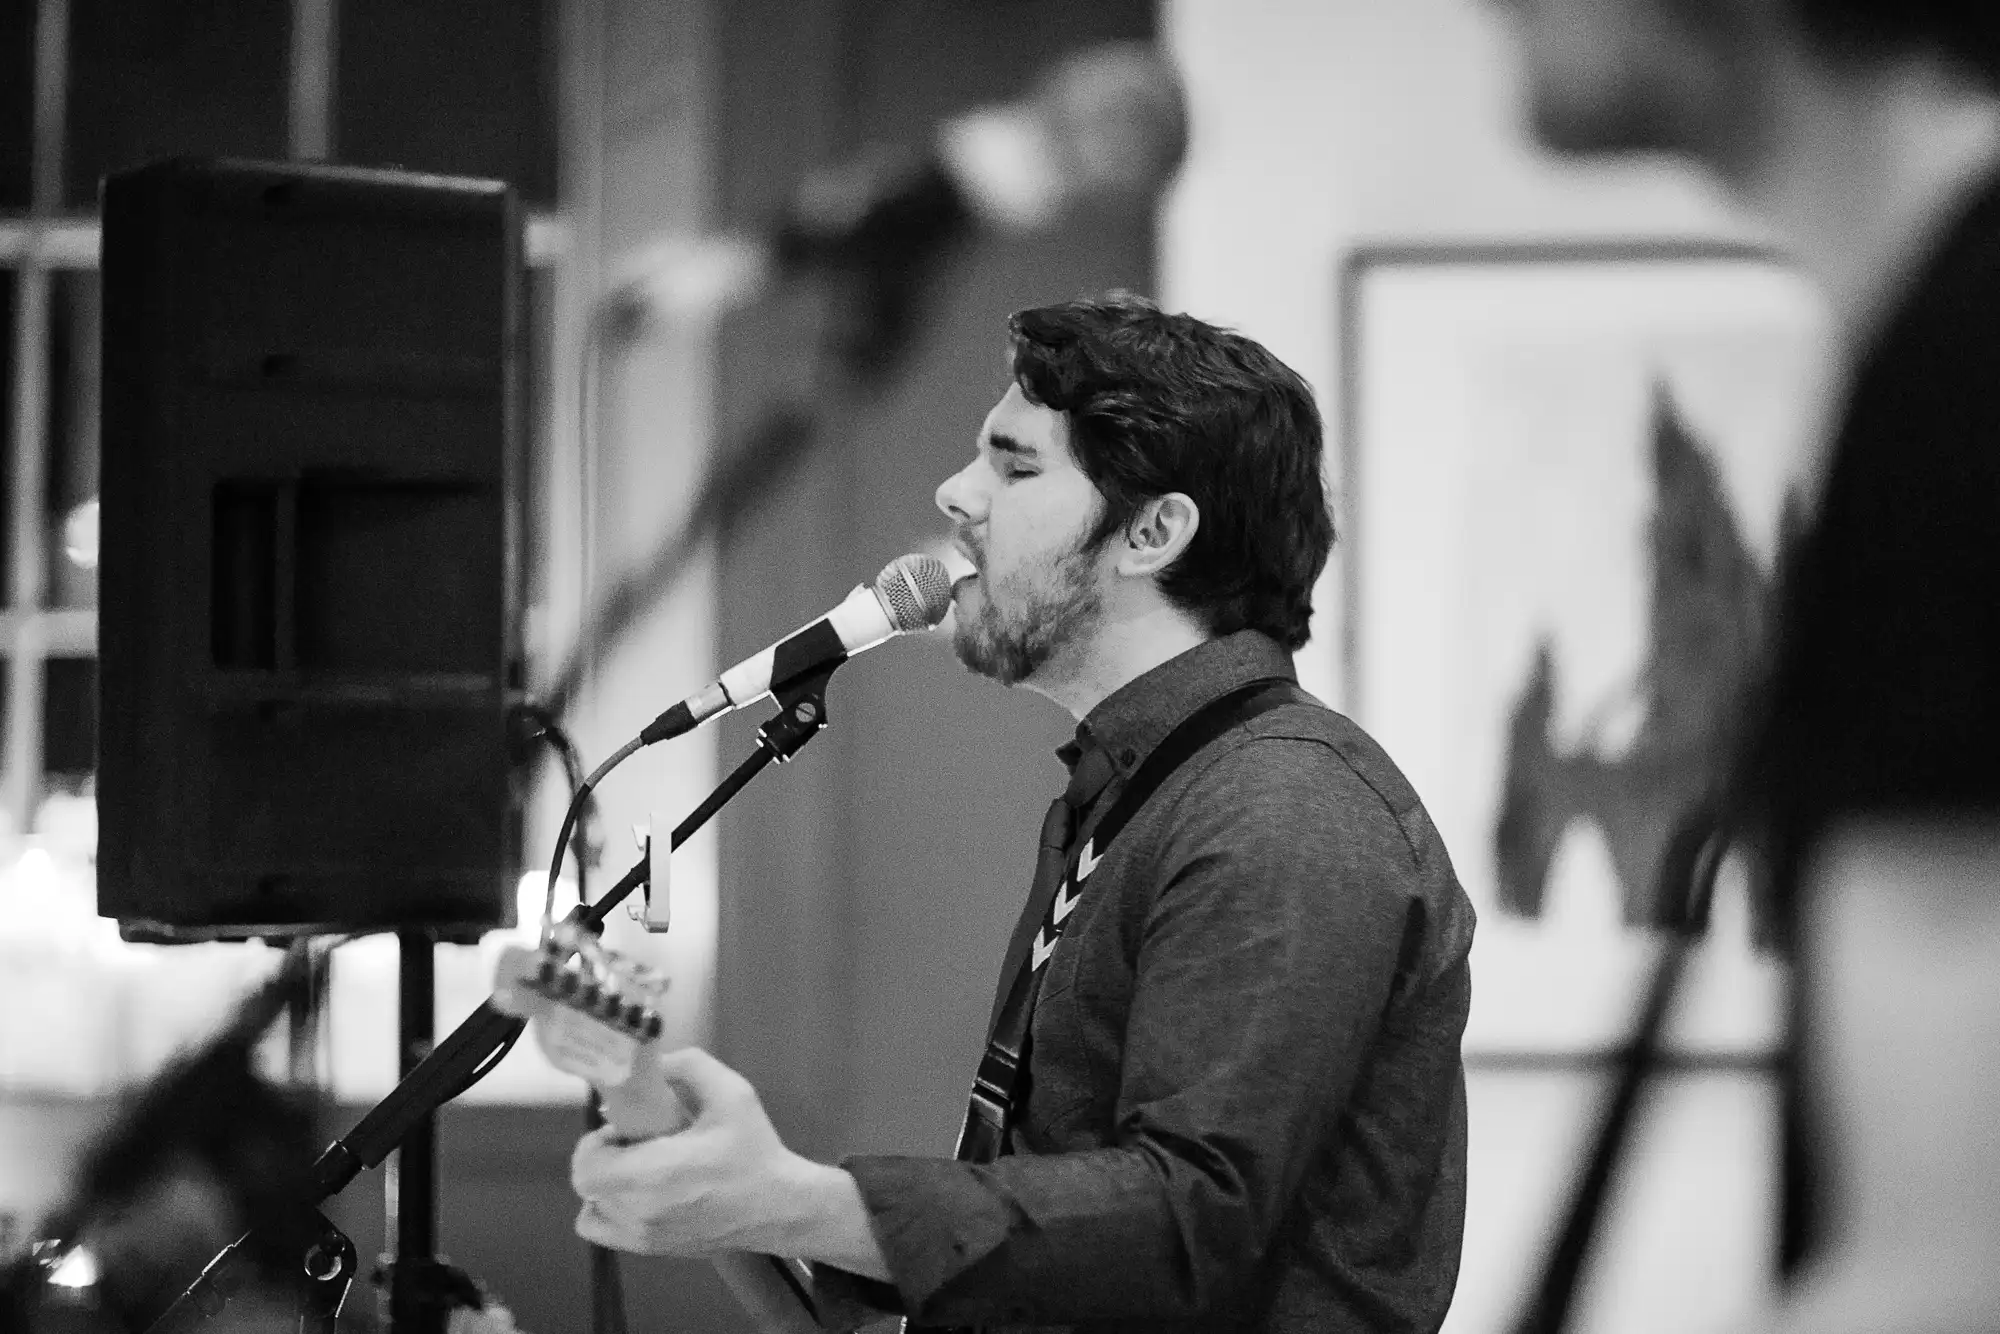 A man sings into a microphone while playing an electric guitar at an indoor event, in a black and white photo.